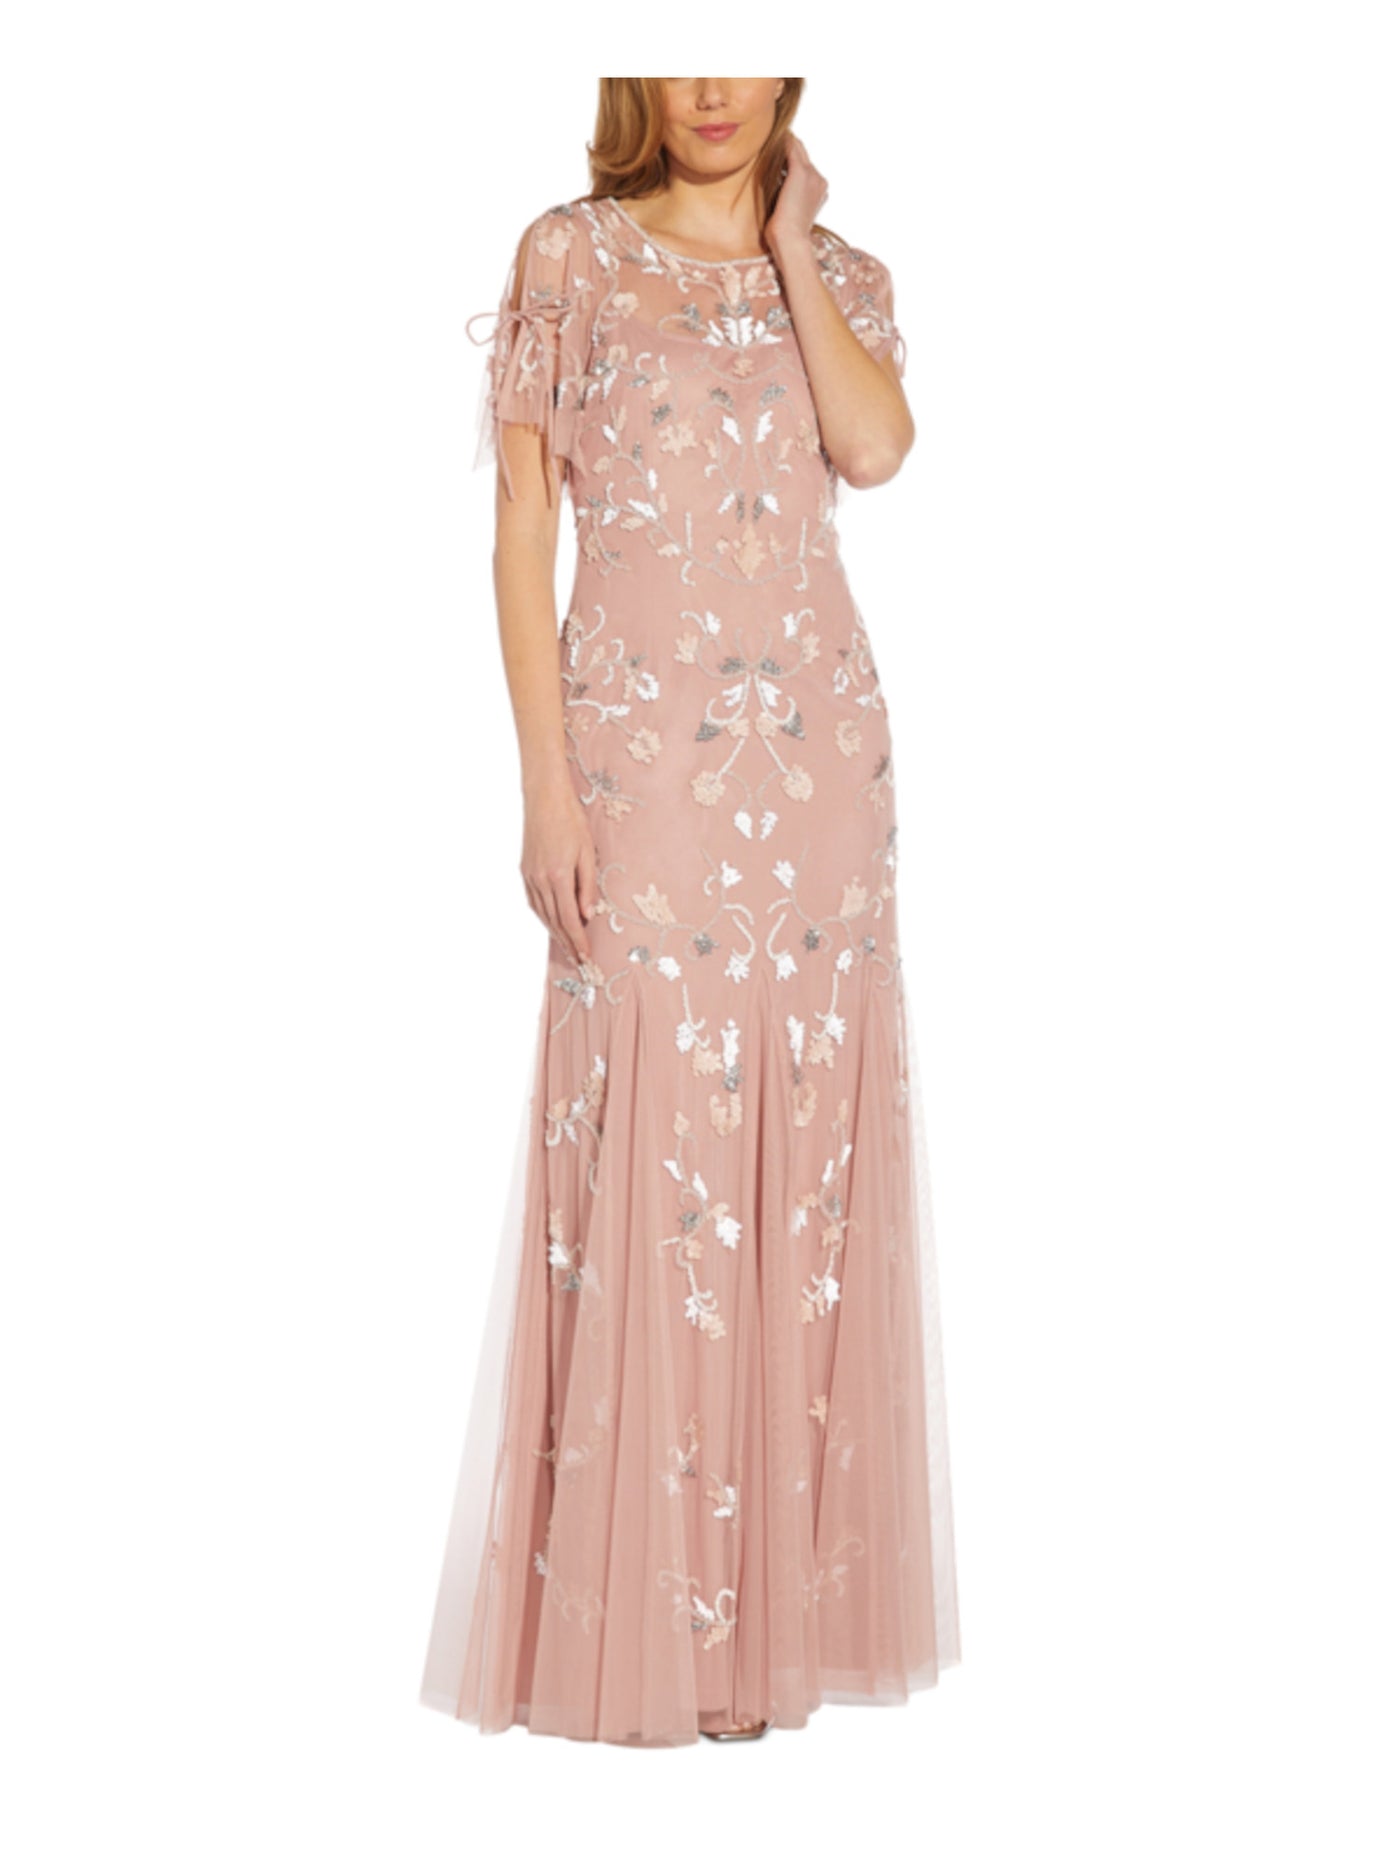 ADRIANNA PAPELL Womens Pink Embellished Zippered Tie Lined Flutter Sleeve Scoop Neck Full-Length Formal Gown Dress 10